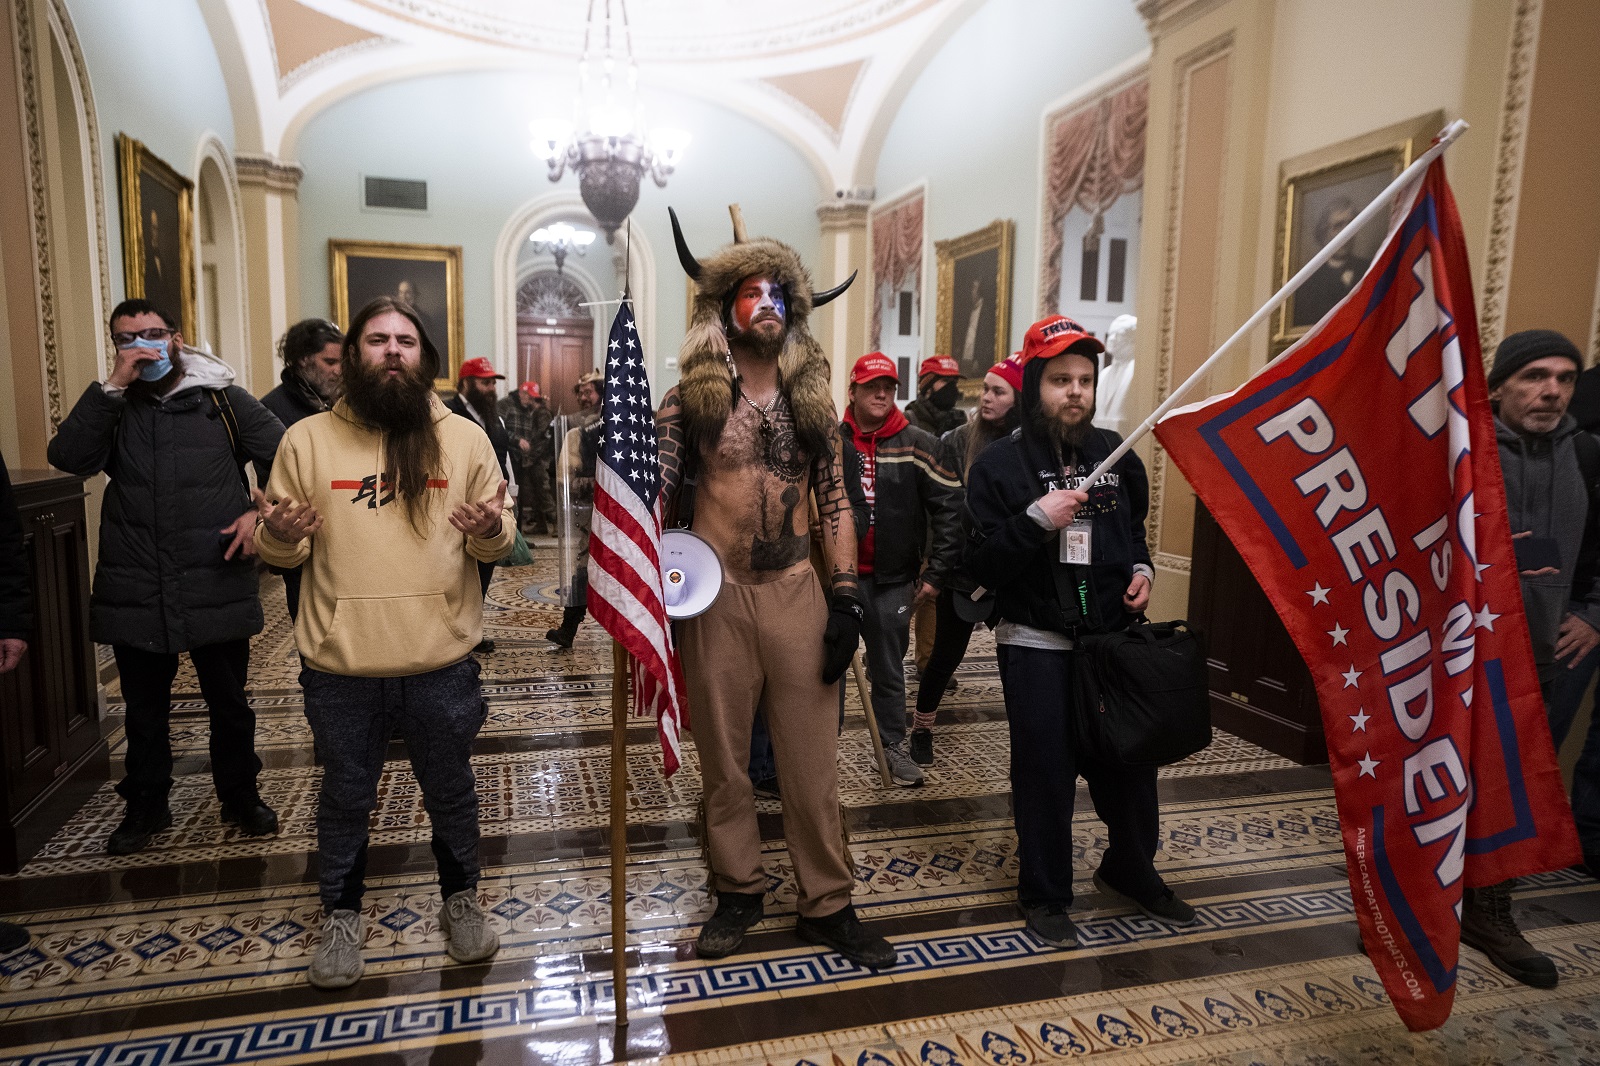 epa09664285 (14/24) (FILE) - Supporters of US President Trump stand by the door to the Senate chambers after they breached the US Capitol security in Washington, DC, USA, 06 January 2021 (reissued 03 January 2021). Following the November 2020 US presidential election, a tone set by supporters of defeated US President Donald Trump escalated further. Trump, who was refusing to concede the victory of Joe Biden, claiming voter fraud and rigged elections, told supporters and white nationalist extreme-right group Proud Boys to respectively 'Stop the Steal' and to 'stand back and stand by'. His social media accounts were suspended and the alt-right platform Parler gained in user numbers. 
 
On 06 January 2021, incumbent US vice president Pence was due to certify the Electoral College votes before Congress, the last step in the process before President-elect Biden was to be sworn in. In the morning, pro-Trump protesters had gathered for the so-called Save America March. Soon after Trump finished his speech at the Ellipse, the crowd marched to the Capitol. The attack had begun. 
 
Rioters broke into the Capitol building where the joint Congress session was being held. Lawmakers barricaded themselves inside the chambers and donned tear gas masks while rioters vandalized the building, some even occupying offices such as House Speaker Pelosi's. Eventually in the evening the building was cleared from insurrectionists, and the Congress chambers reconvened their session, confirming Joe Biden as the winner of the 2020 US presidential election. 

In the aftermath, more than 600 people were charged with federal crimes in connection to the insurgency, and close Trump aides such as Steve Bannon, Mark Meadows and Roger Stone were subpoenaed by the House select committee investigating the attack. Trump himself was acquitted by the Senate in his second impeachment trial, this time for "inciting an insurrection".  EPA/JIM LO SCALZO  ATTENTION: This Image is part of a PHOTO SET *** Loc